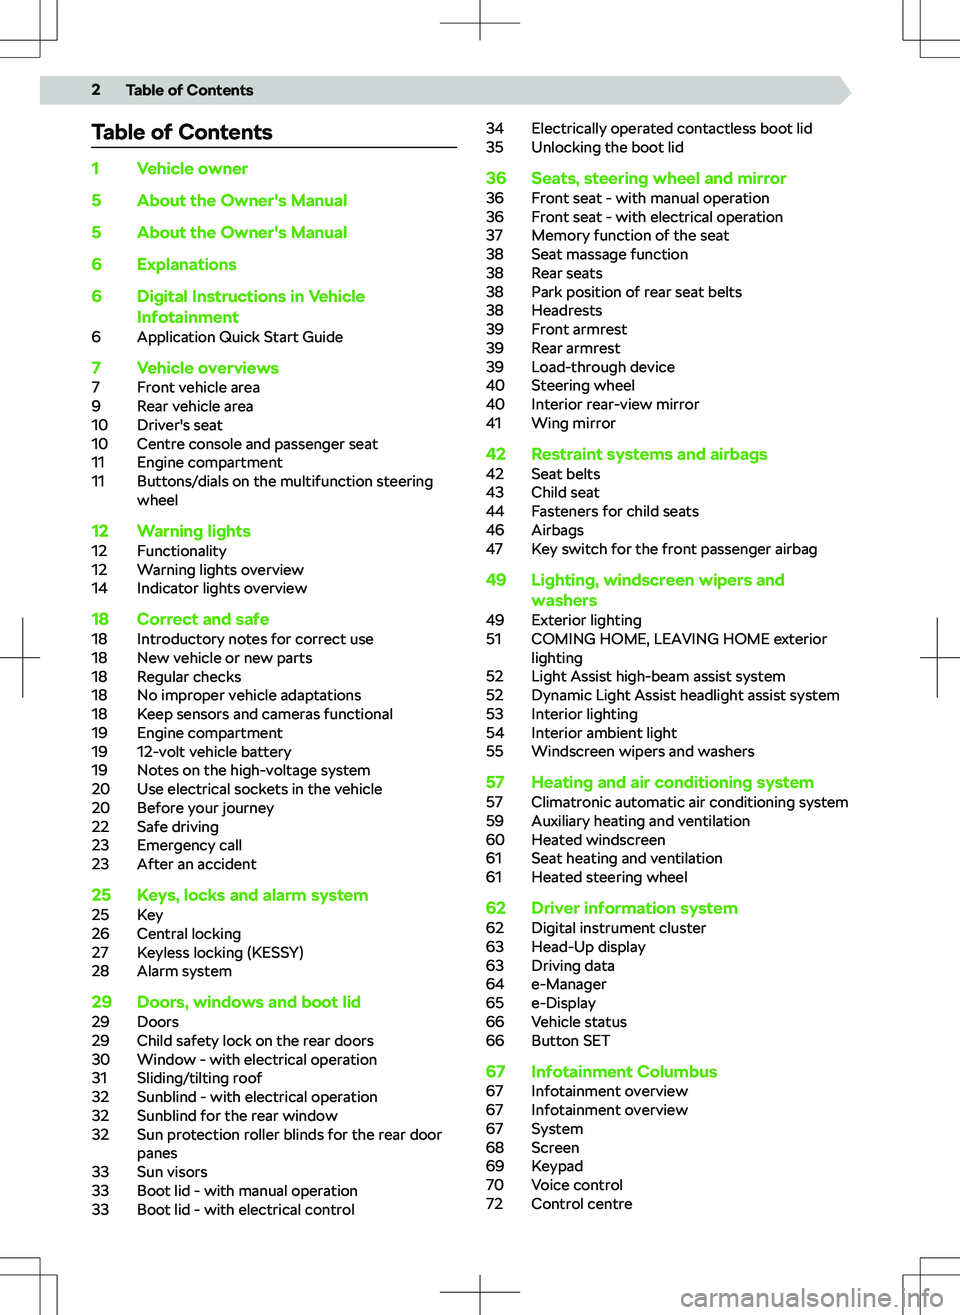 SKODA OCTAVIA 2020  Owner´s Manual Table of Contents1Vehicle owner5About the Owner